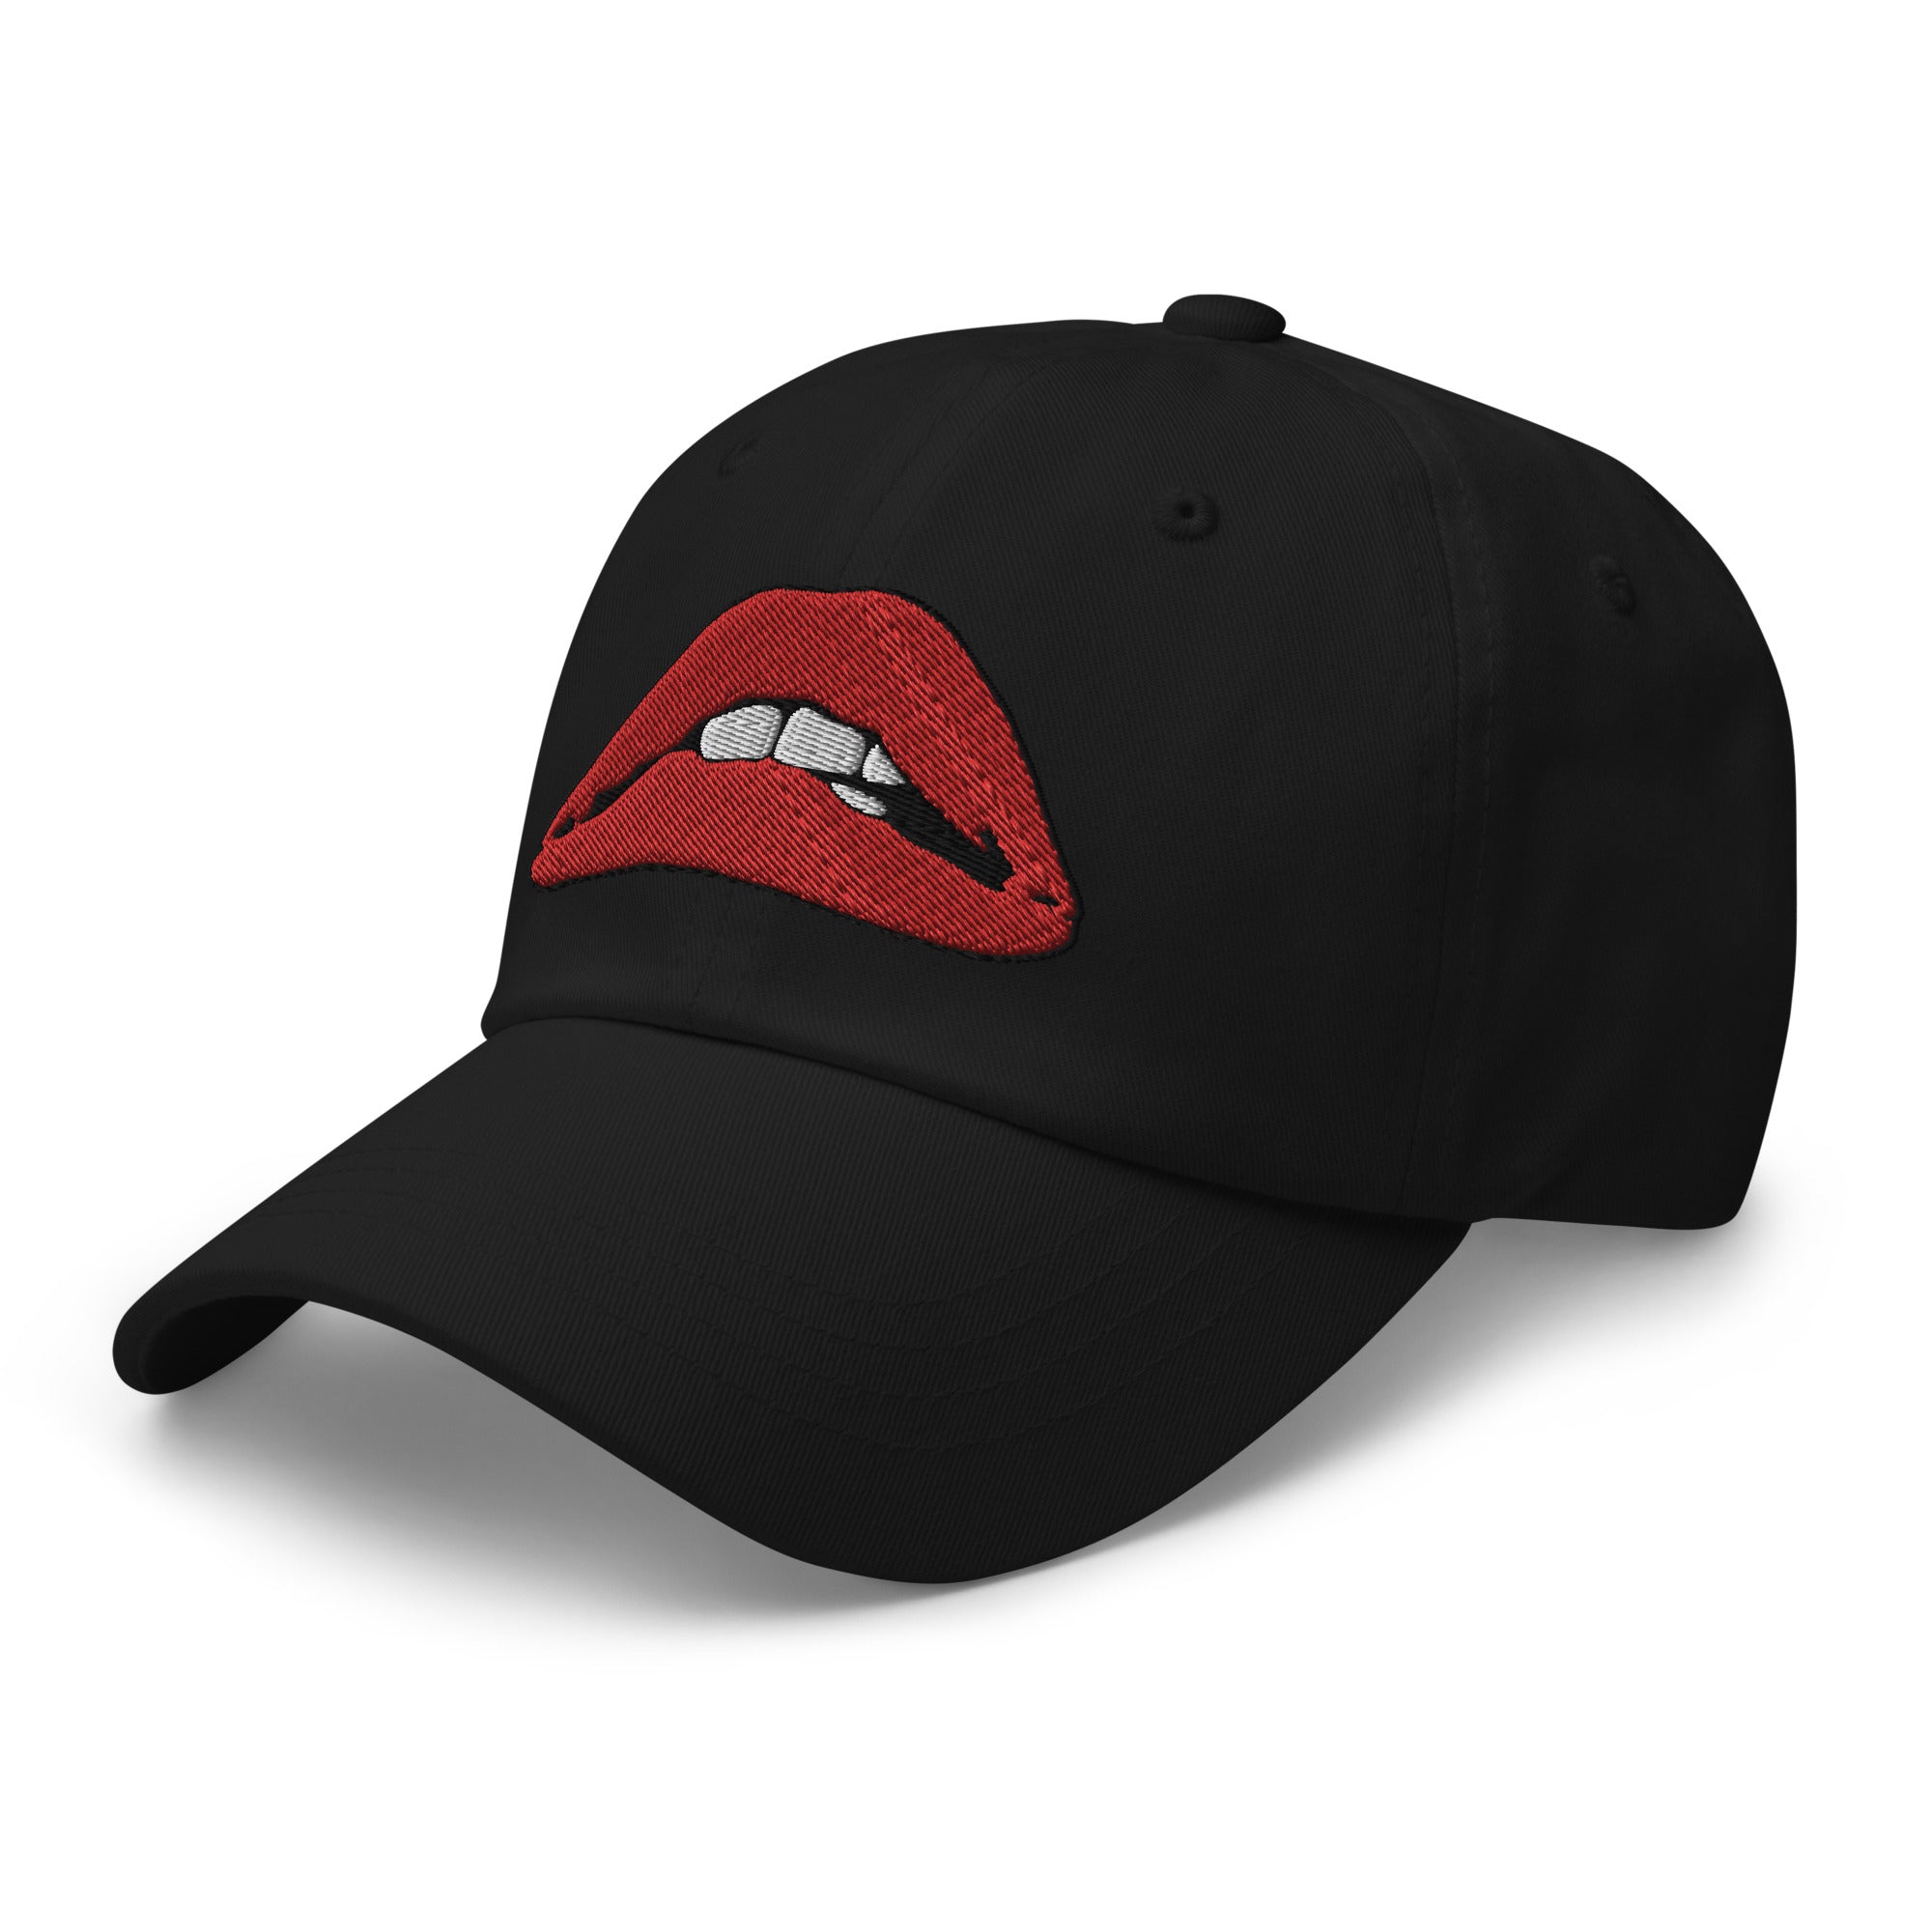 Rocky Horror Picture Show Lips Embroidered Baseball Cap Dad hat - Edge of Life Designs